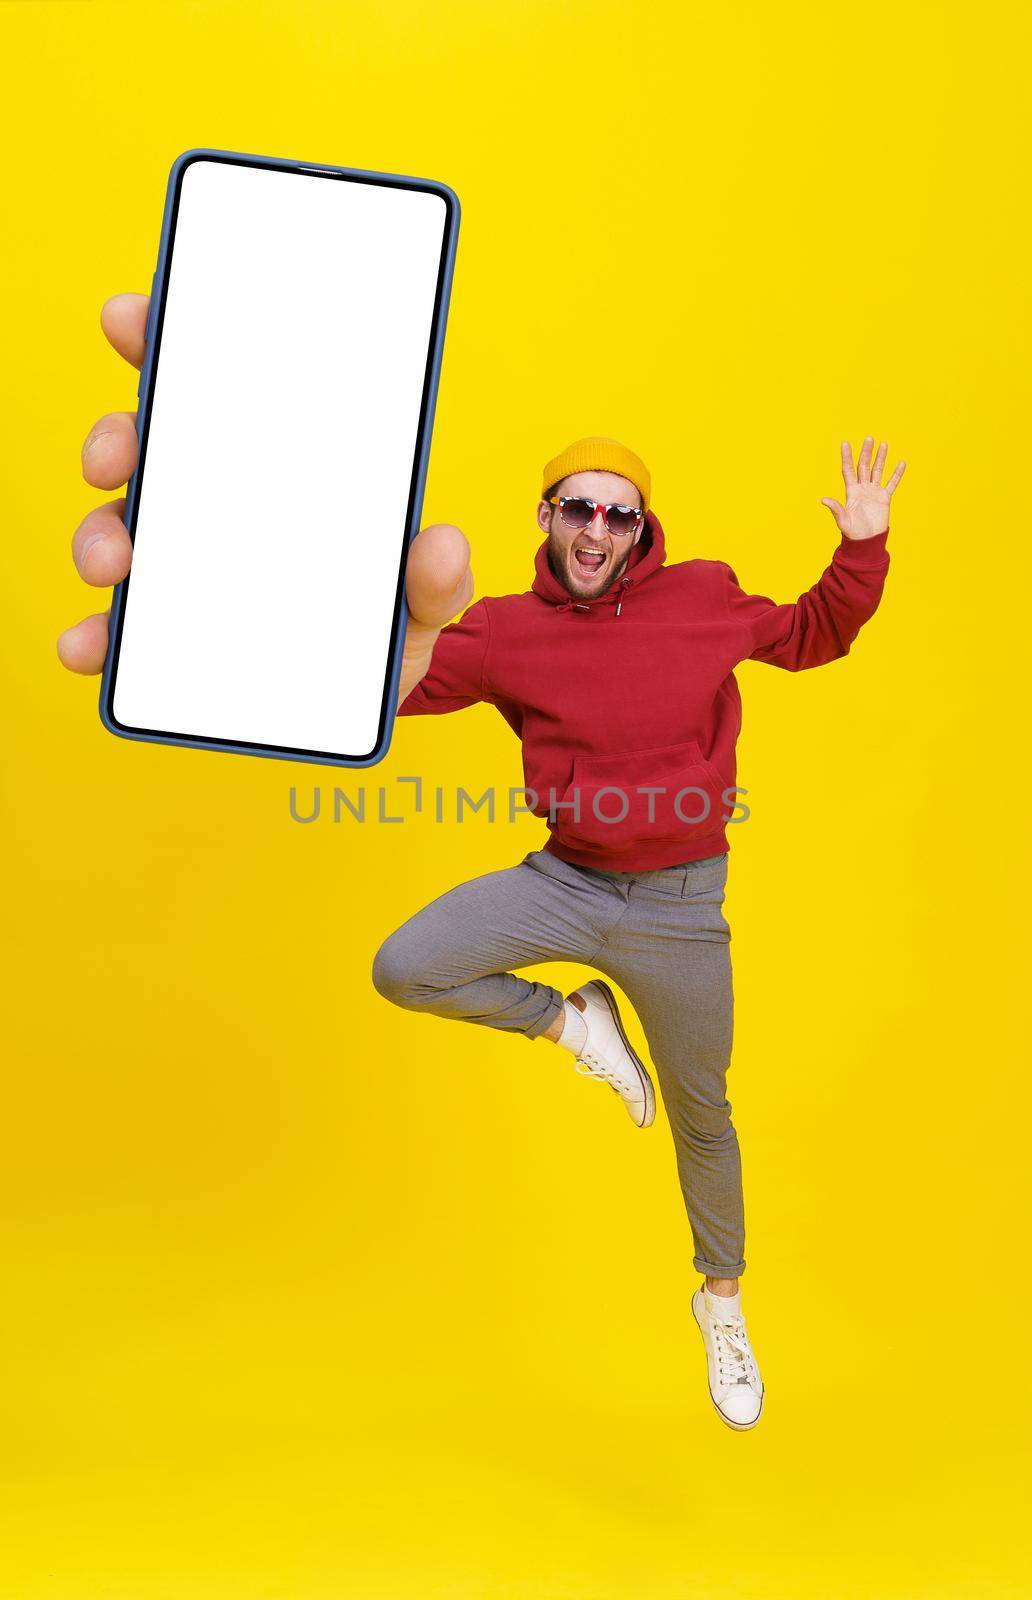 Young man in Uk flag sunglasses jumping in joy like ballet dancer holding smartphone wearing casual red hoodie and jeans isolated on yellow background. Mobile app advertising product placement by LipikStockMedia